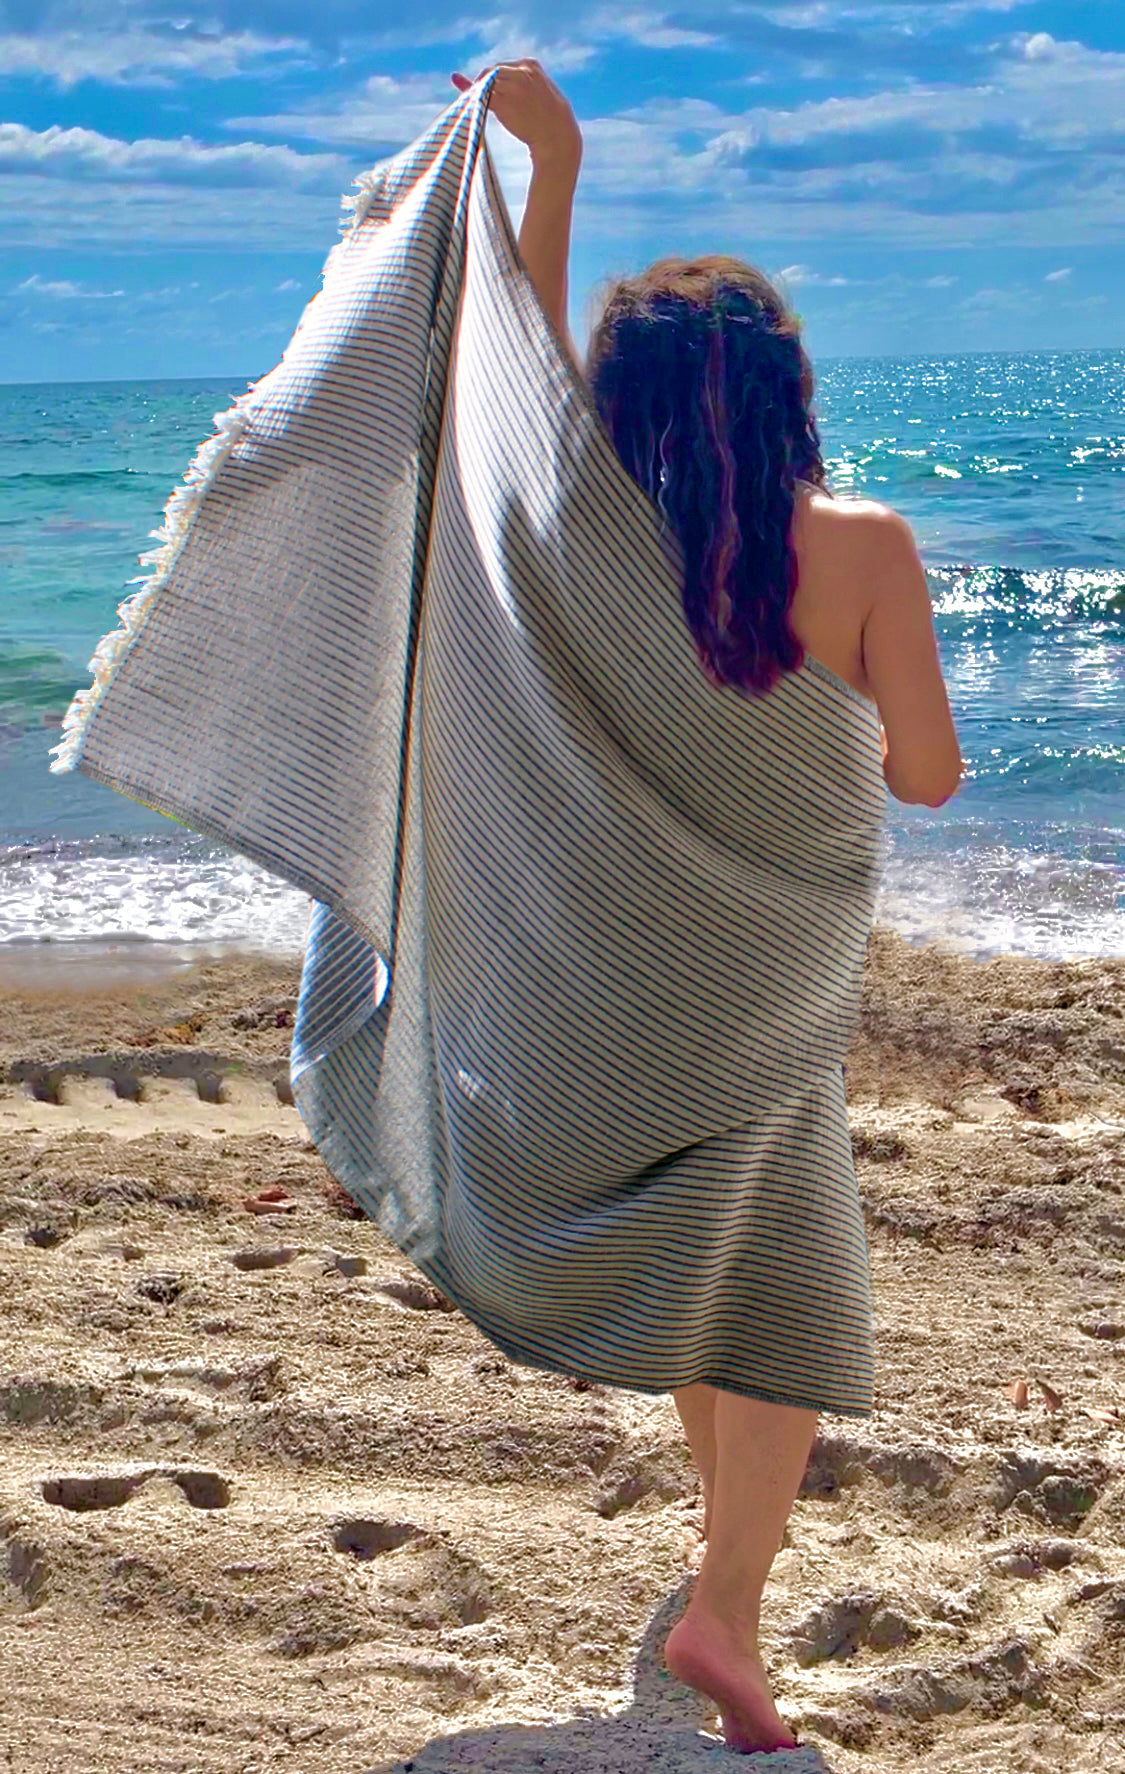 Authentic Turkish Towels for beach, bath and more from Quiquattro –  QuiQuattro